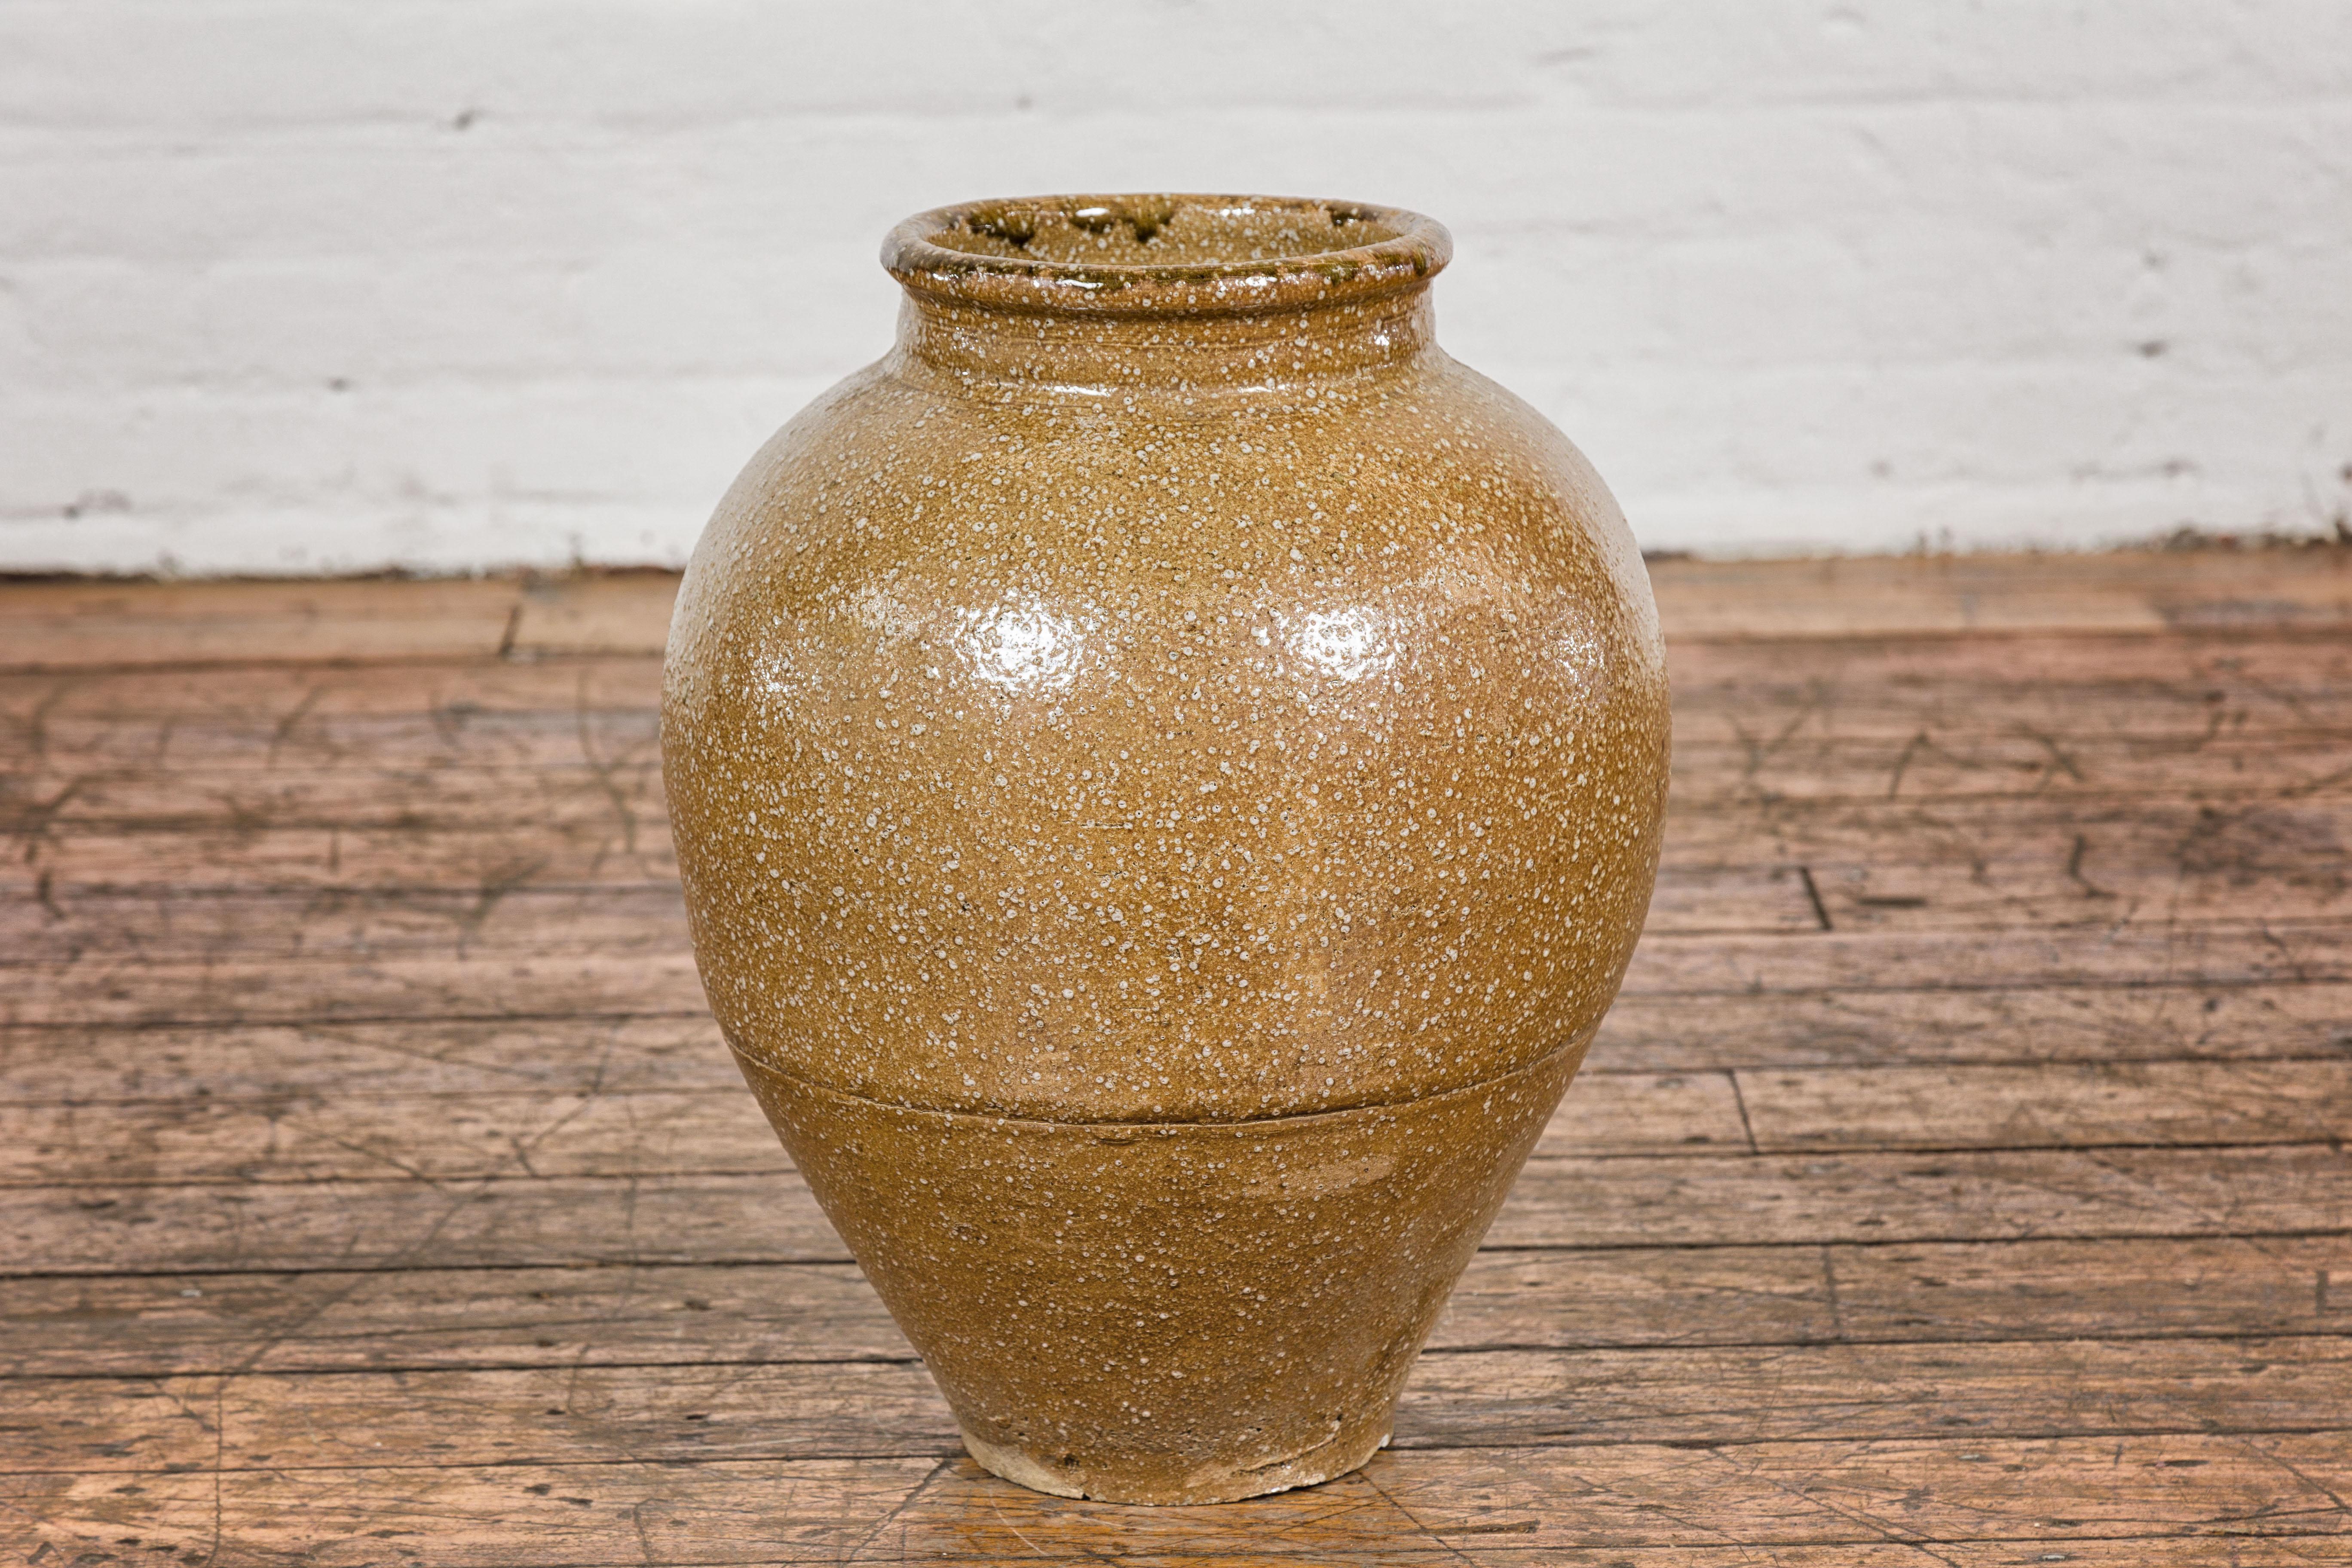 Japanese Taishō Period Two-Tone Sand Glaze Vase with Textured Finish, circa 1900 For Sale 6